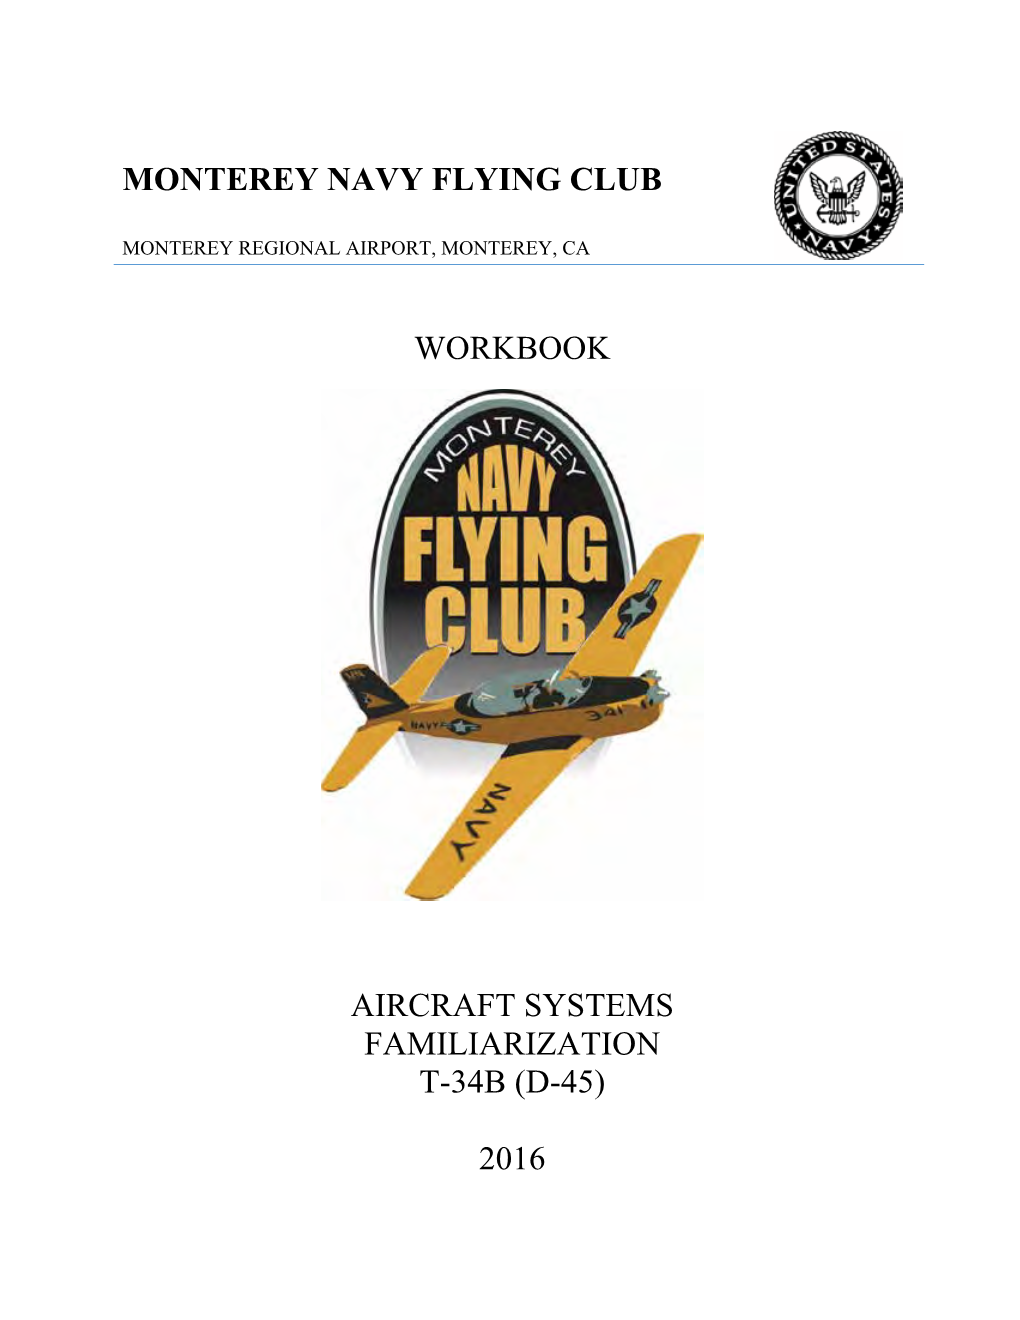 Monterey Navy Flying Club Workbook Aircraft Systems